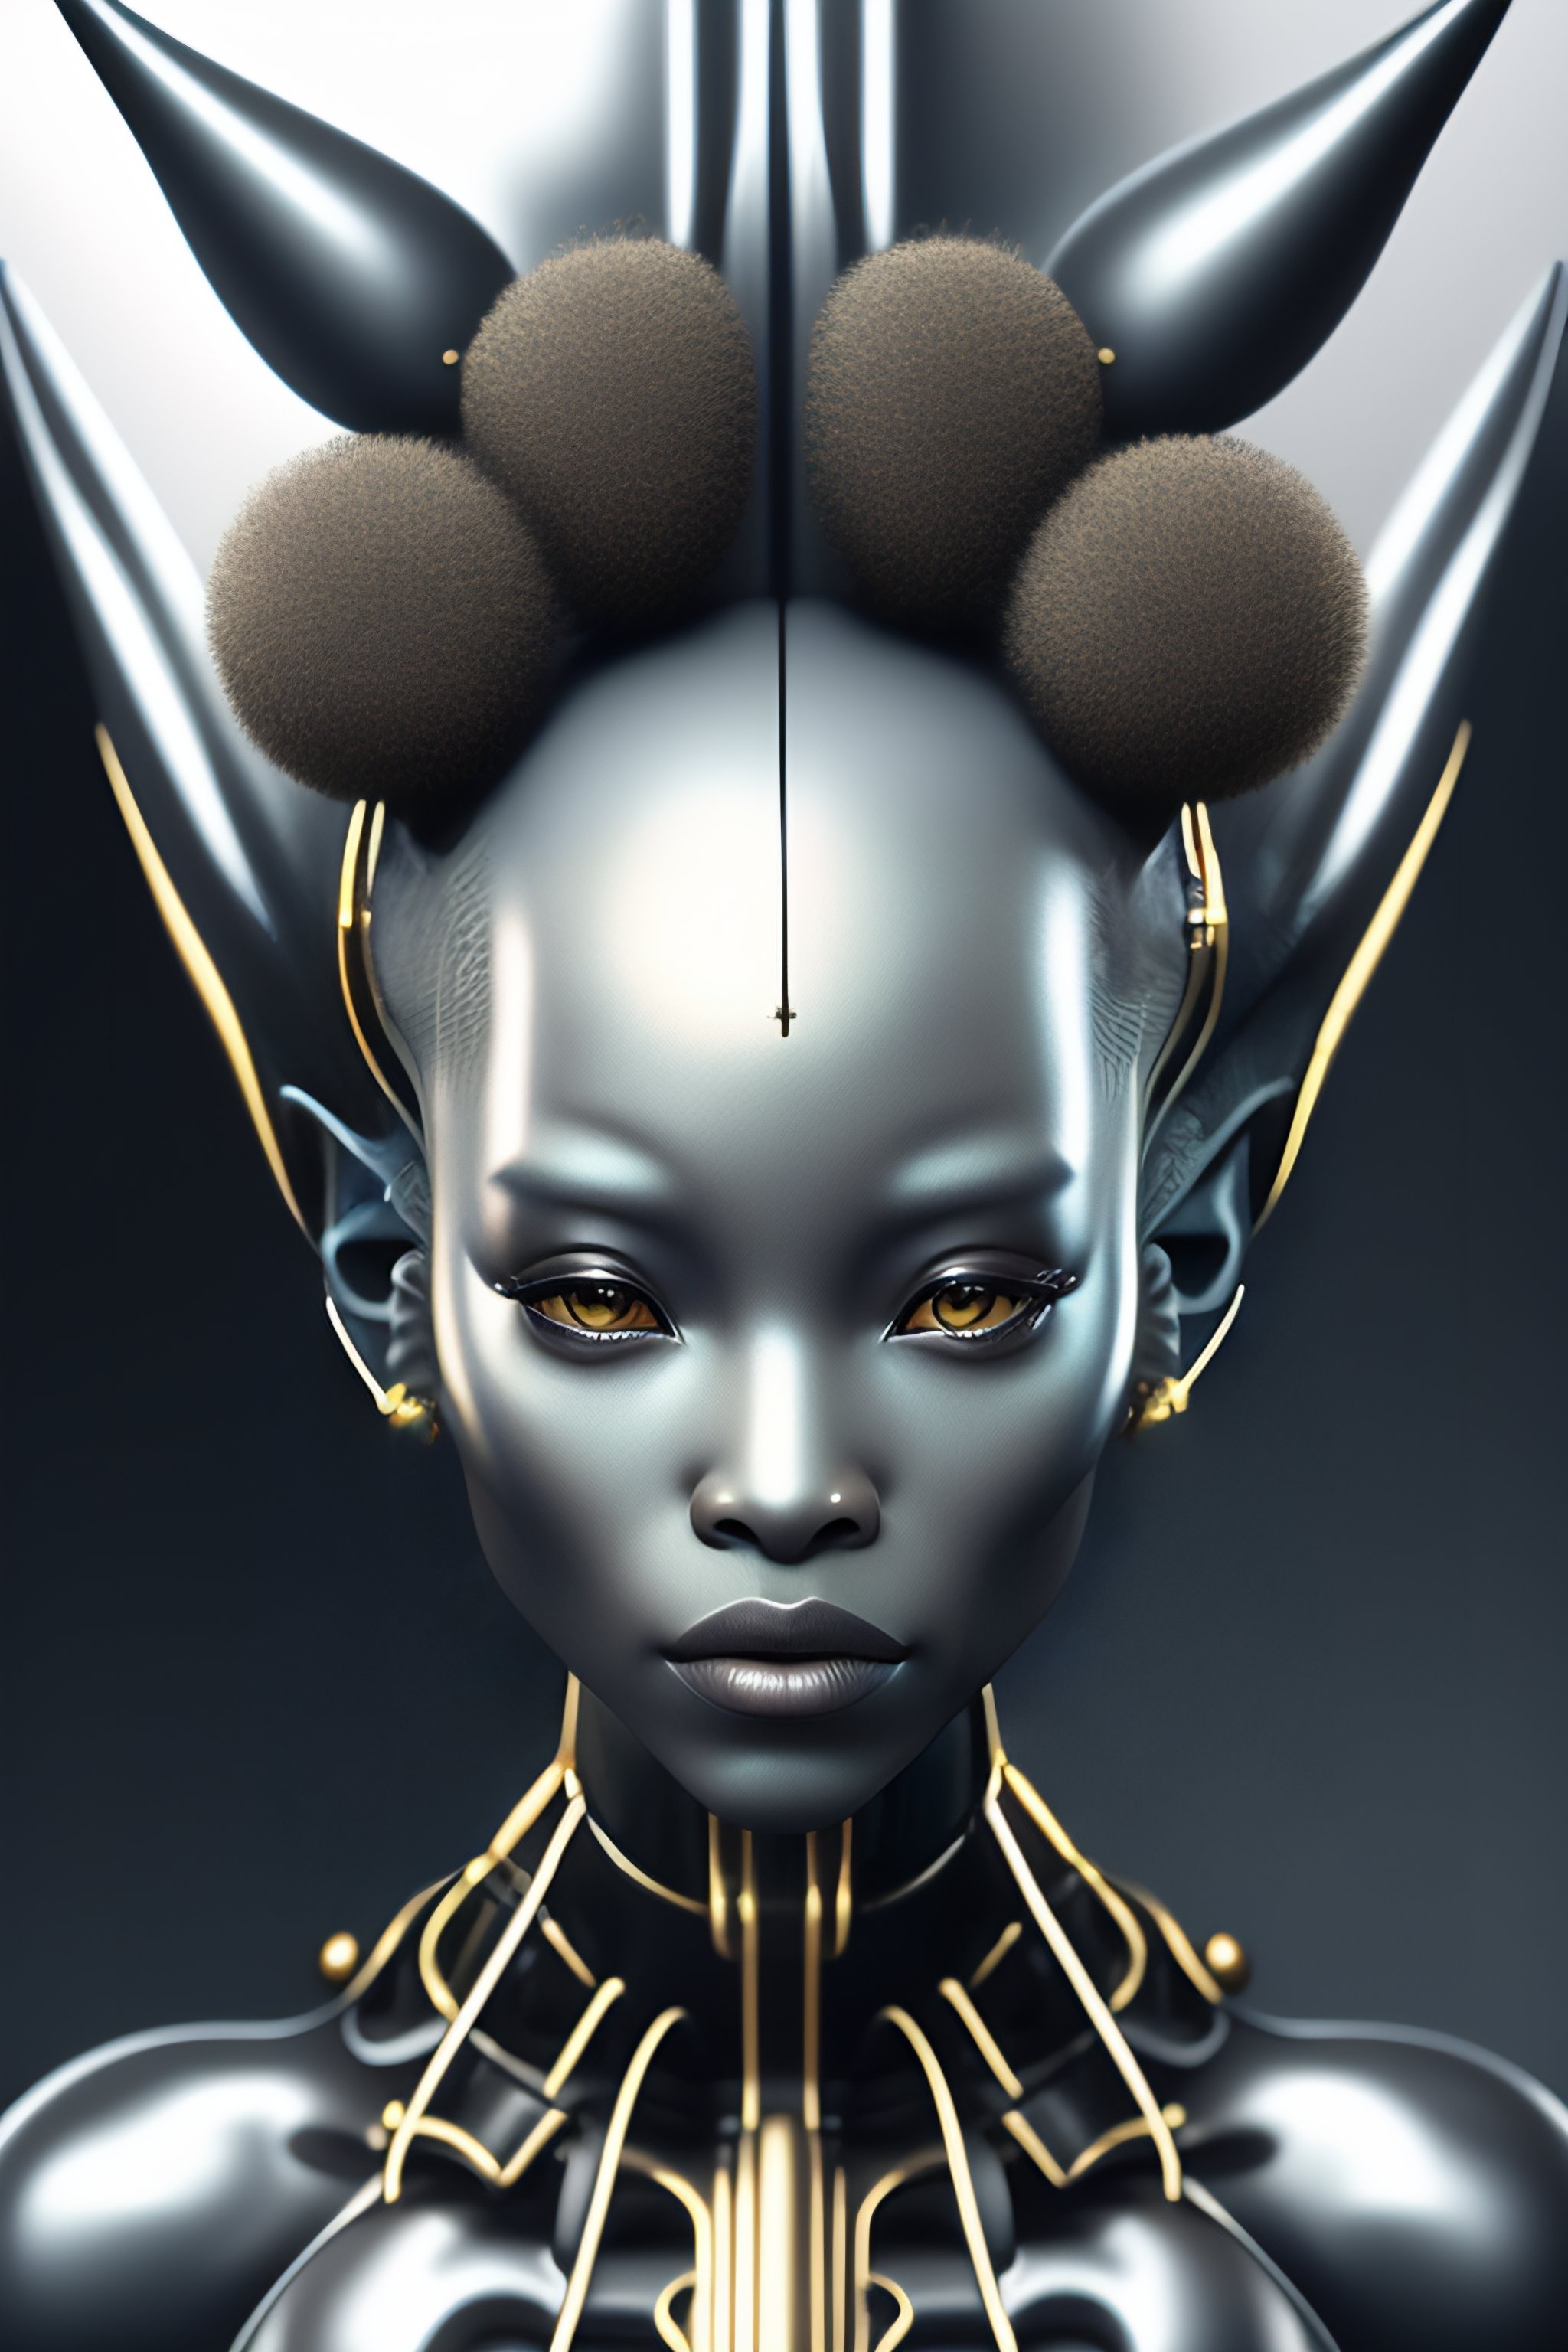 Lexica Detailed Realistic Drawing Of An Alien Humanoid Species With Antennas In The Head And 